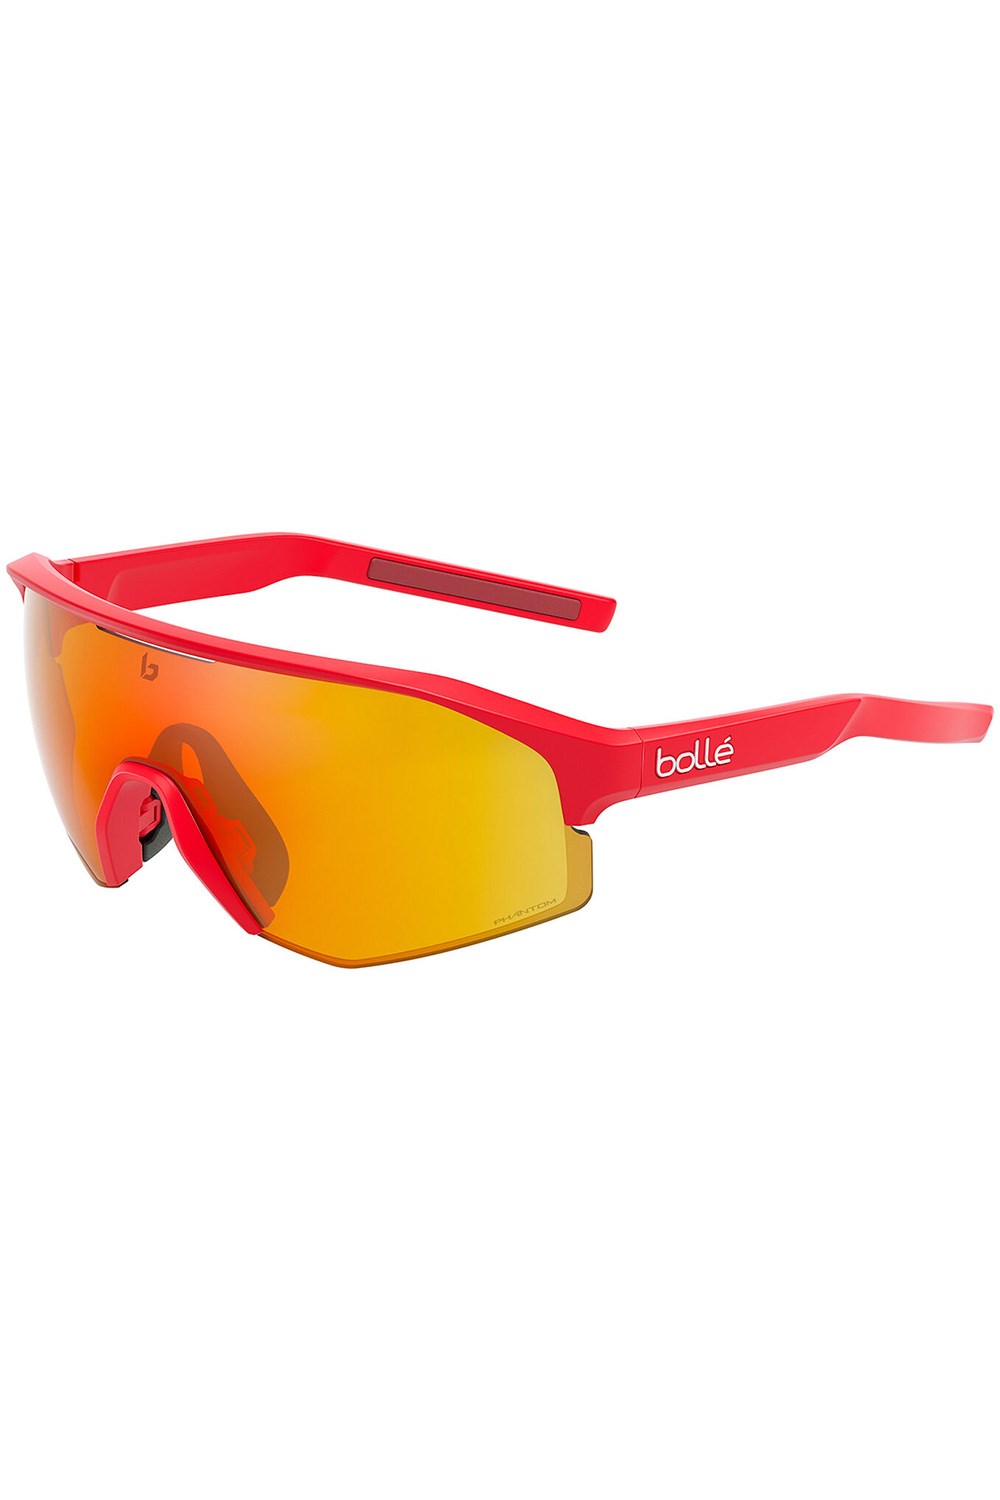 Lightshifter XL Unisex Cycling Sunglasses -